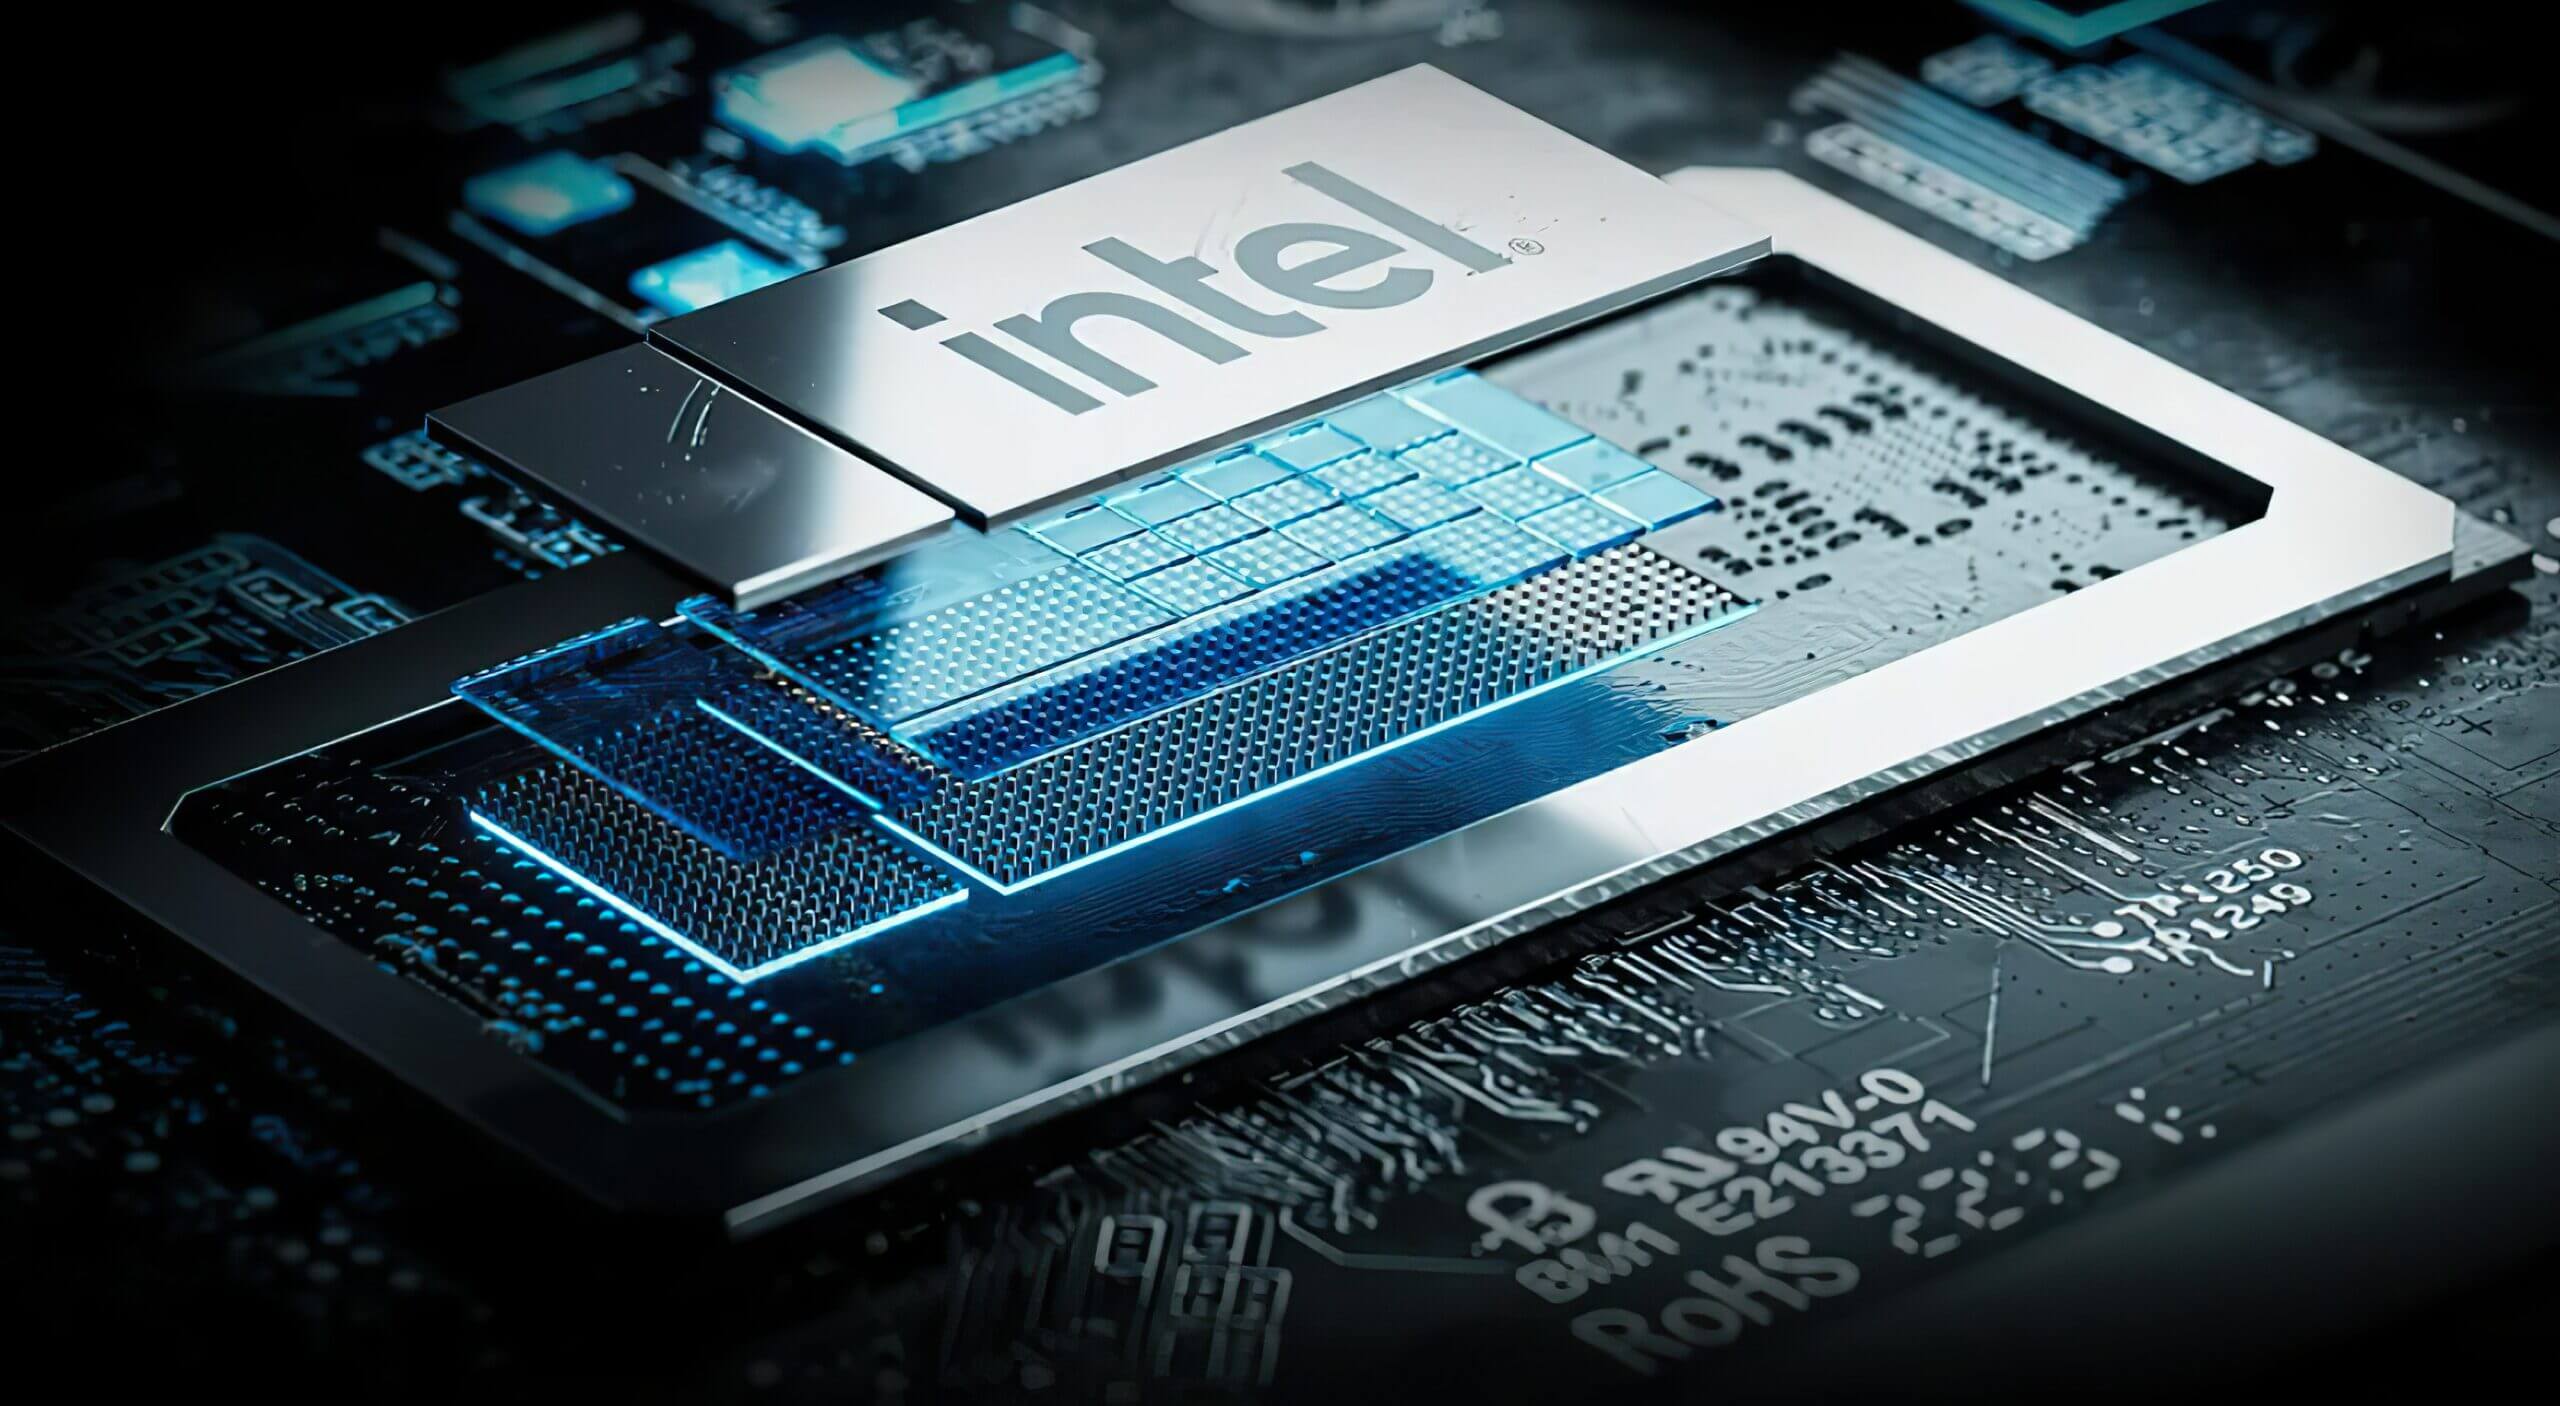 Intel 15th Gen Arrow Lake CPUs Already Running in Labs, Launching in